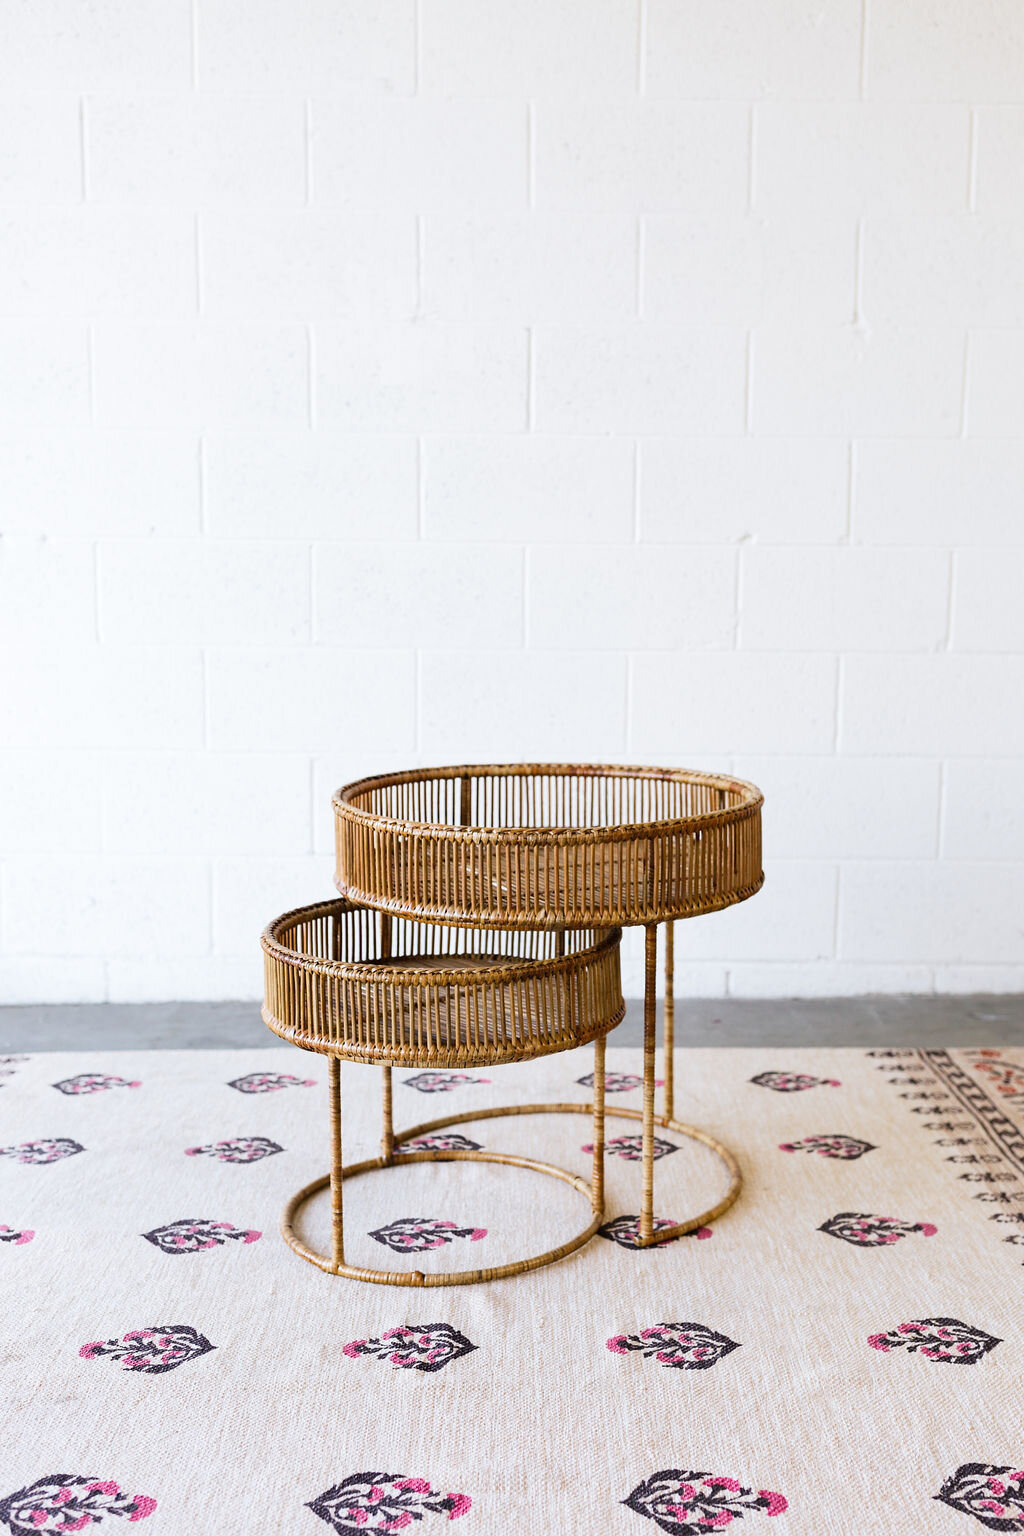 Delilah Bamboo Nesting Tables 2 - Provenance Vintage Rentals Specialty Rentals Near Me Los Angeles Event Rentals Near Me Wedding Lounge Rentals Party Rentals Vintage Lounge Modern Lounge Modern Furniture Rentals near Me.jpg